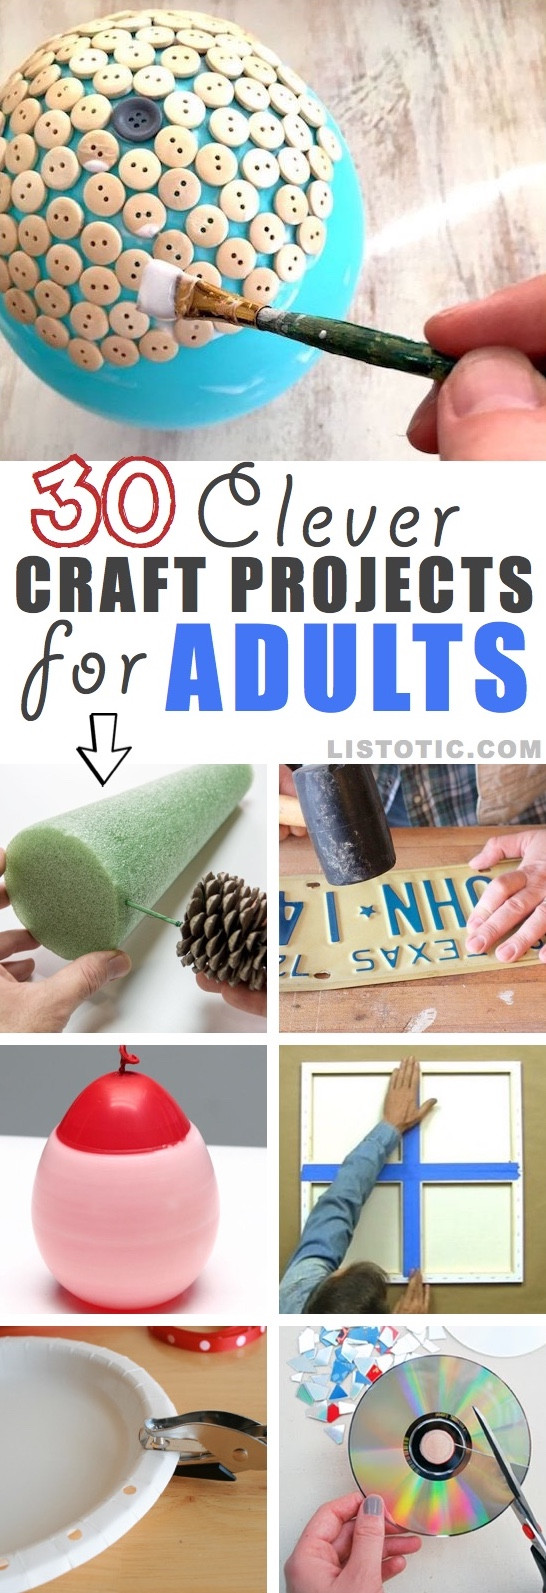 Craft Project Ideas For Adults
 Easy DIY Craft Ideas That Will Spark Your Creativity for